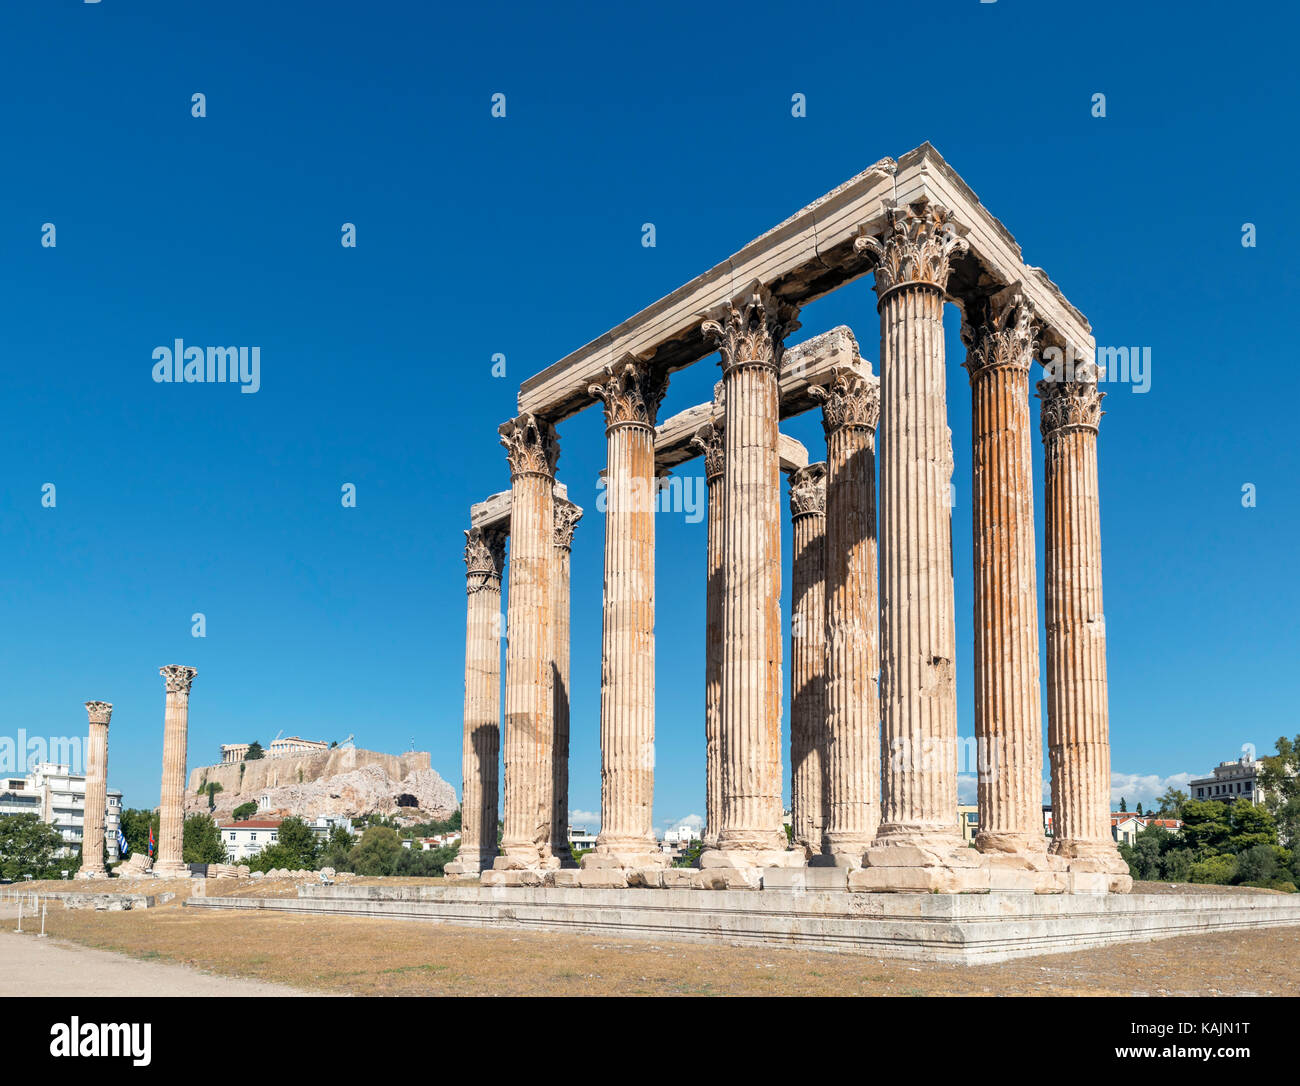 The Temple of Olympian Zeus (Olympeion) with the Acropolis in the background, Athens, Greece Stock Photo